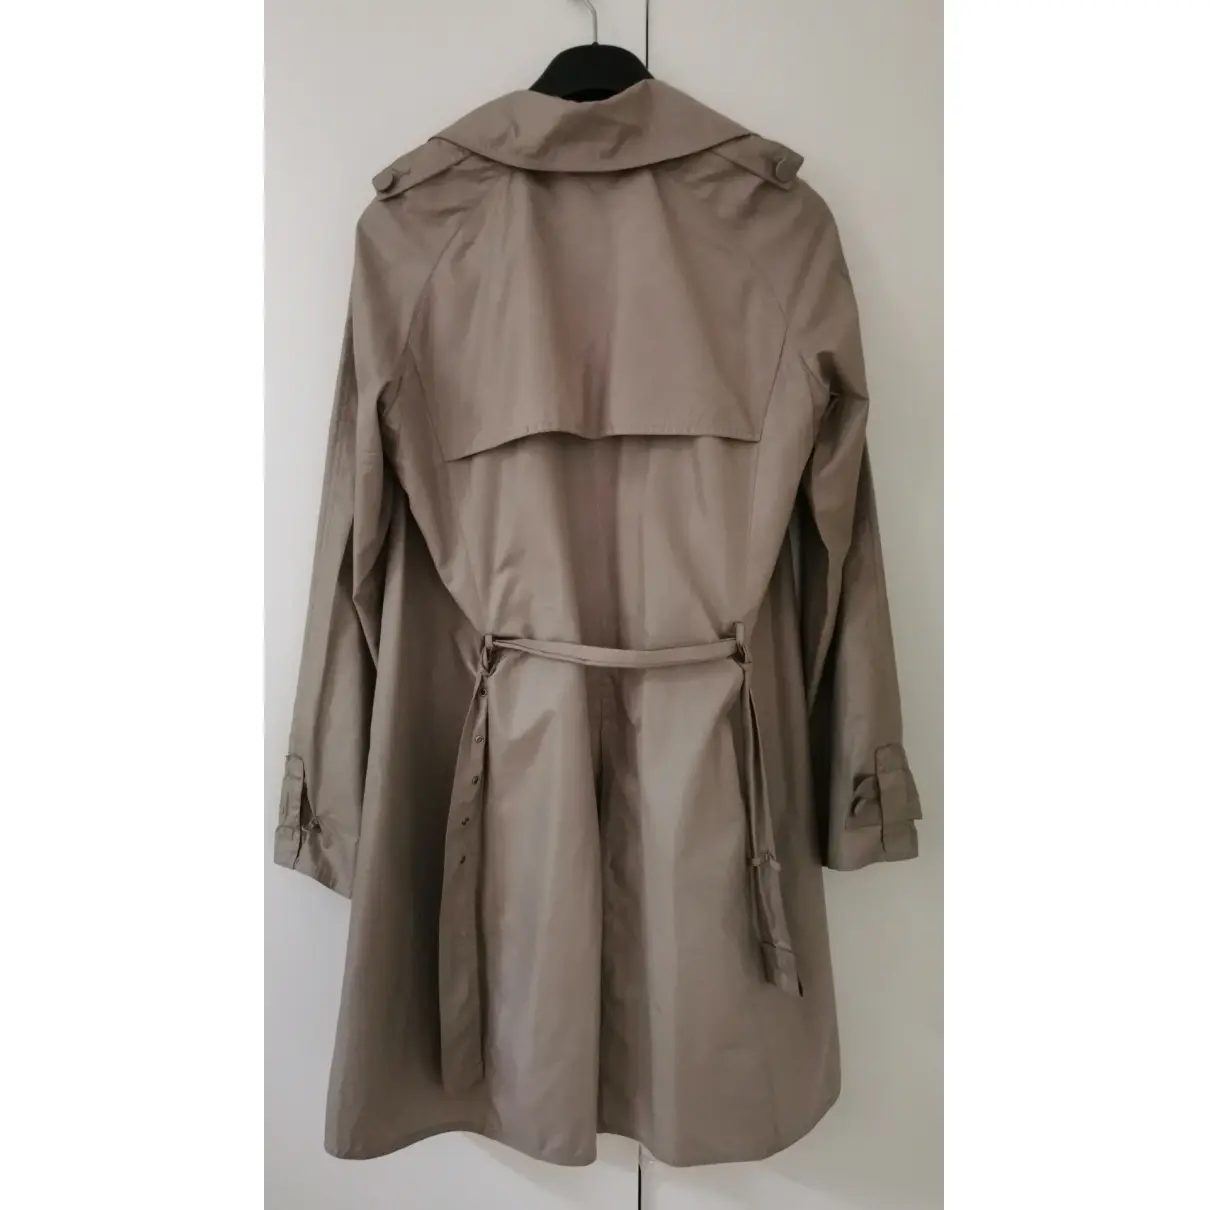 Buy See by Chloé Trench coat online